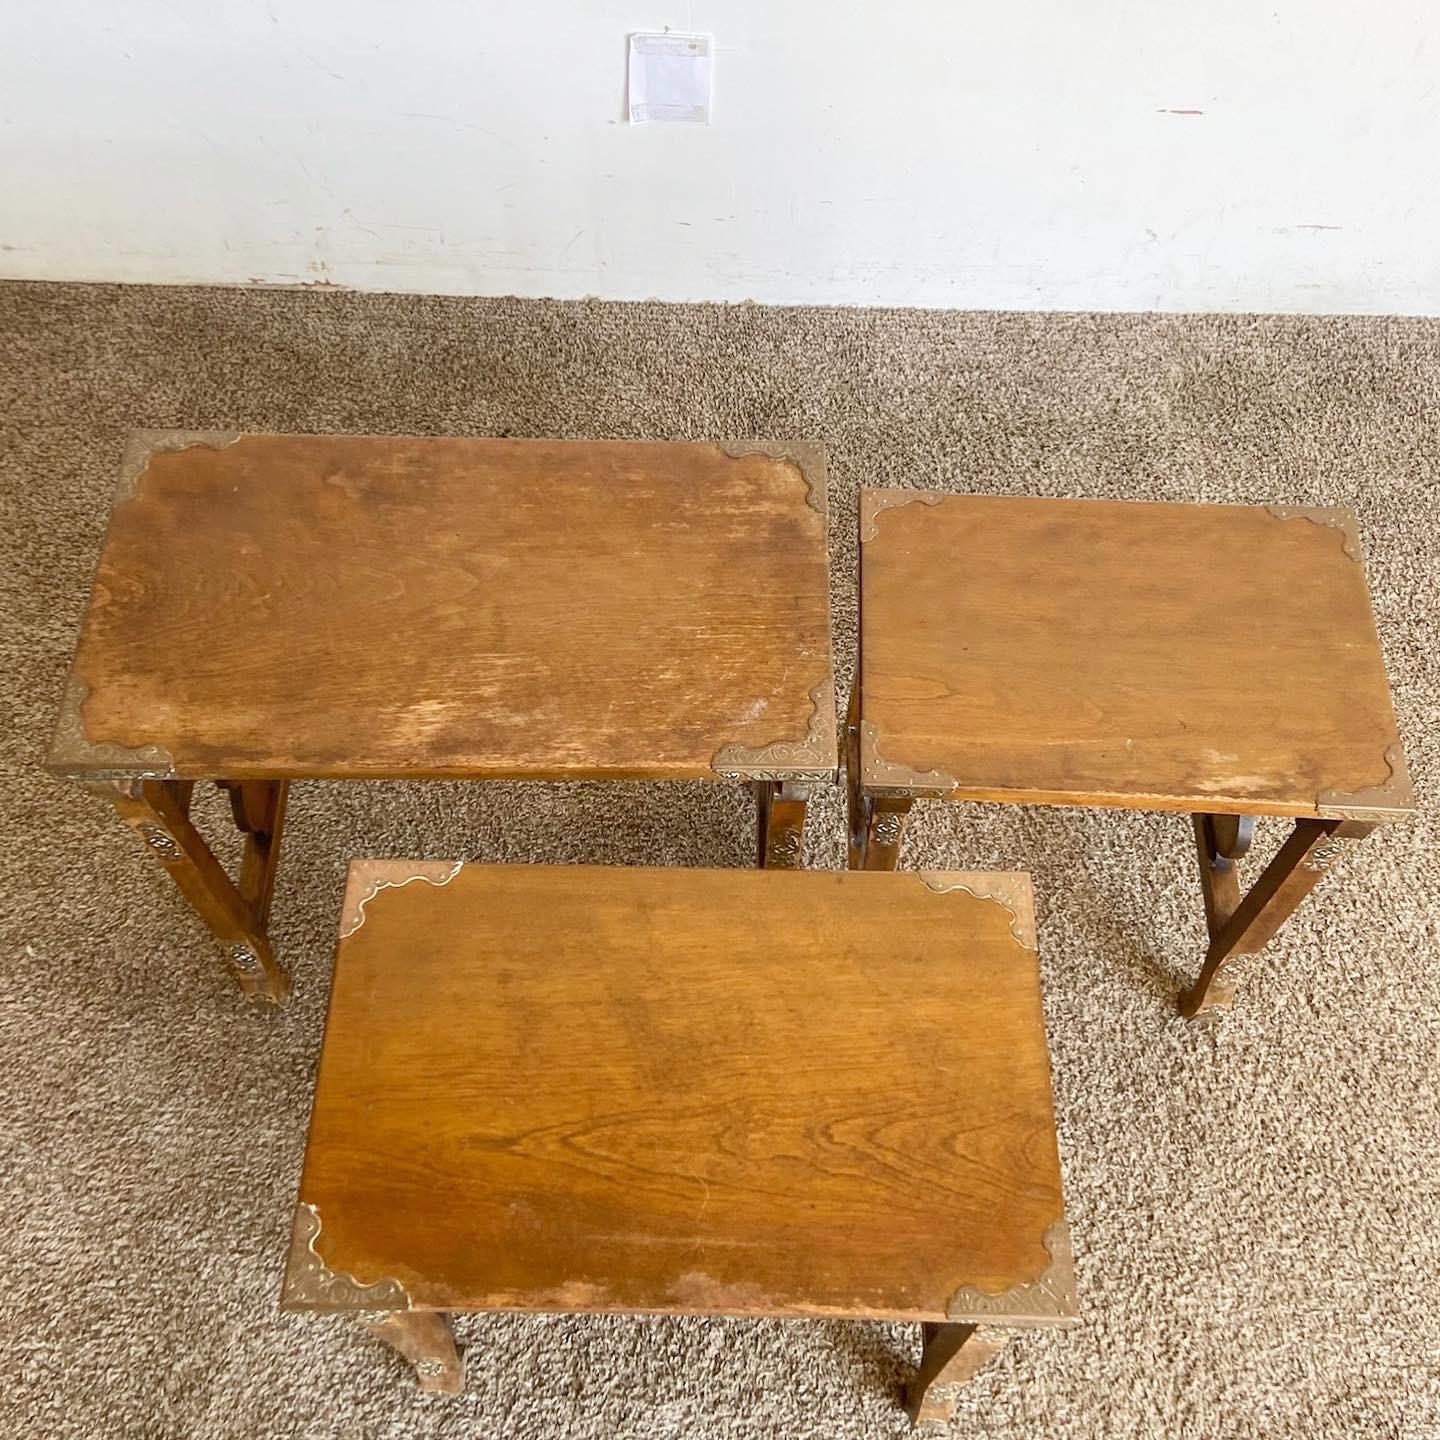 20th Century Japanese Wooden Nesting Tables With Brass Accents - Set of 3 For Sale